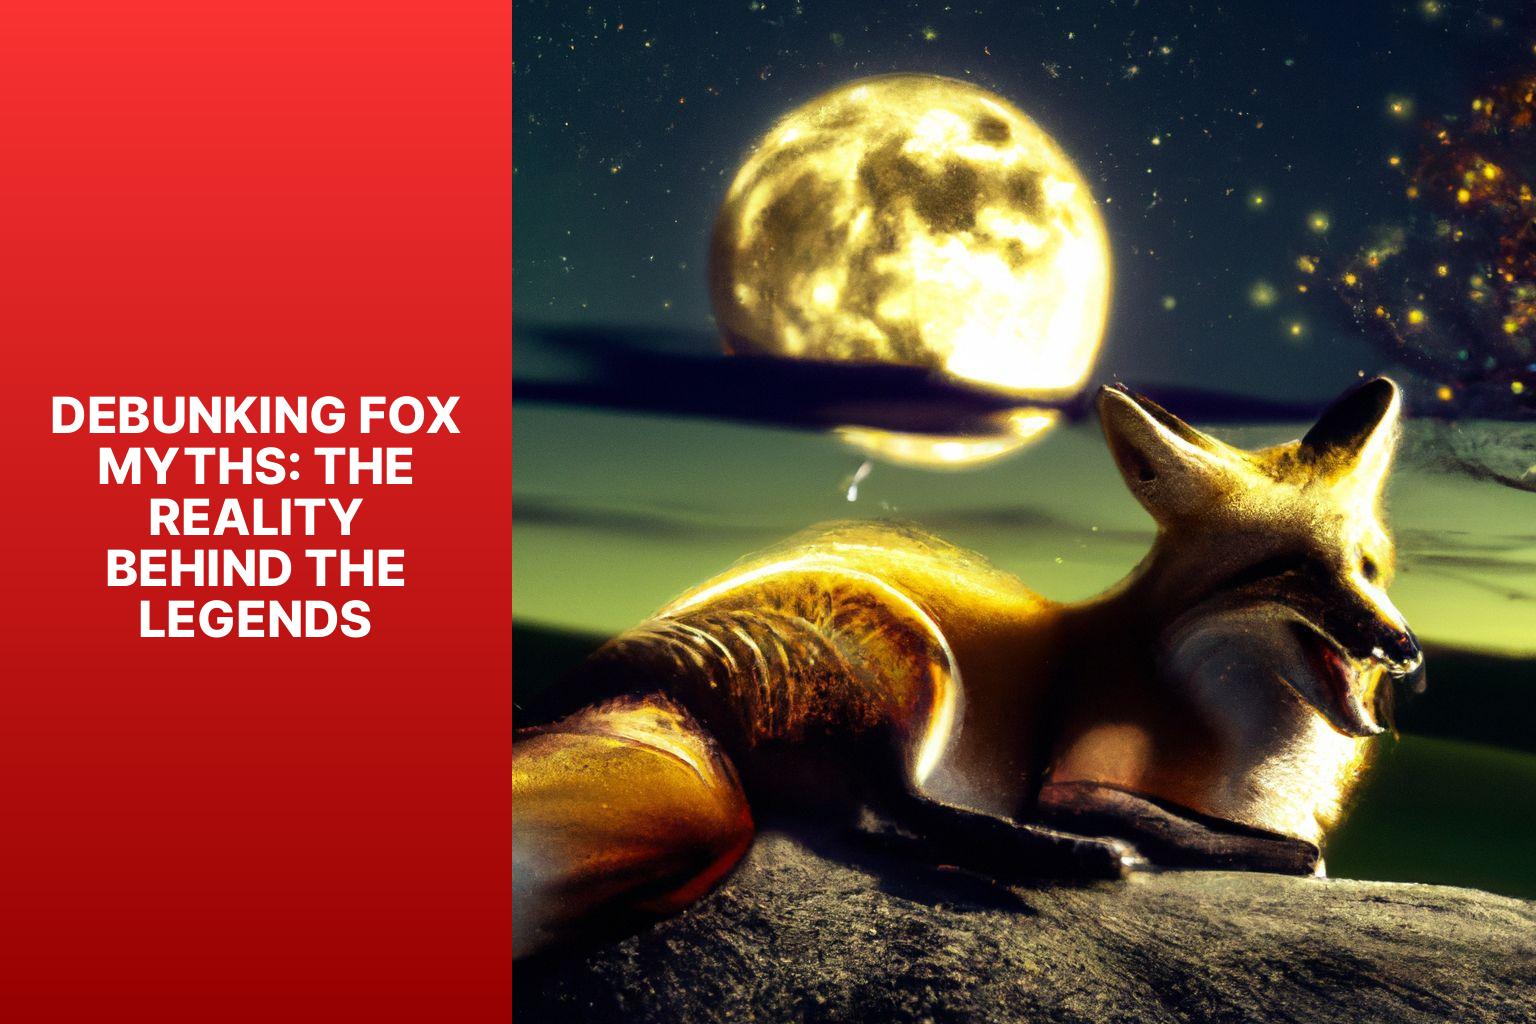 Debunking Fox Myths: The Reality Behind the Legends - Fox Myths in History 